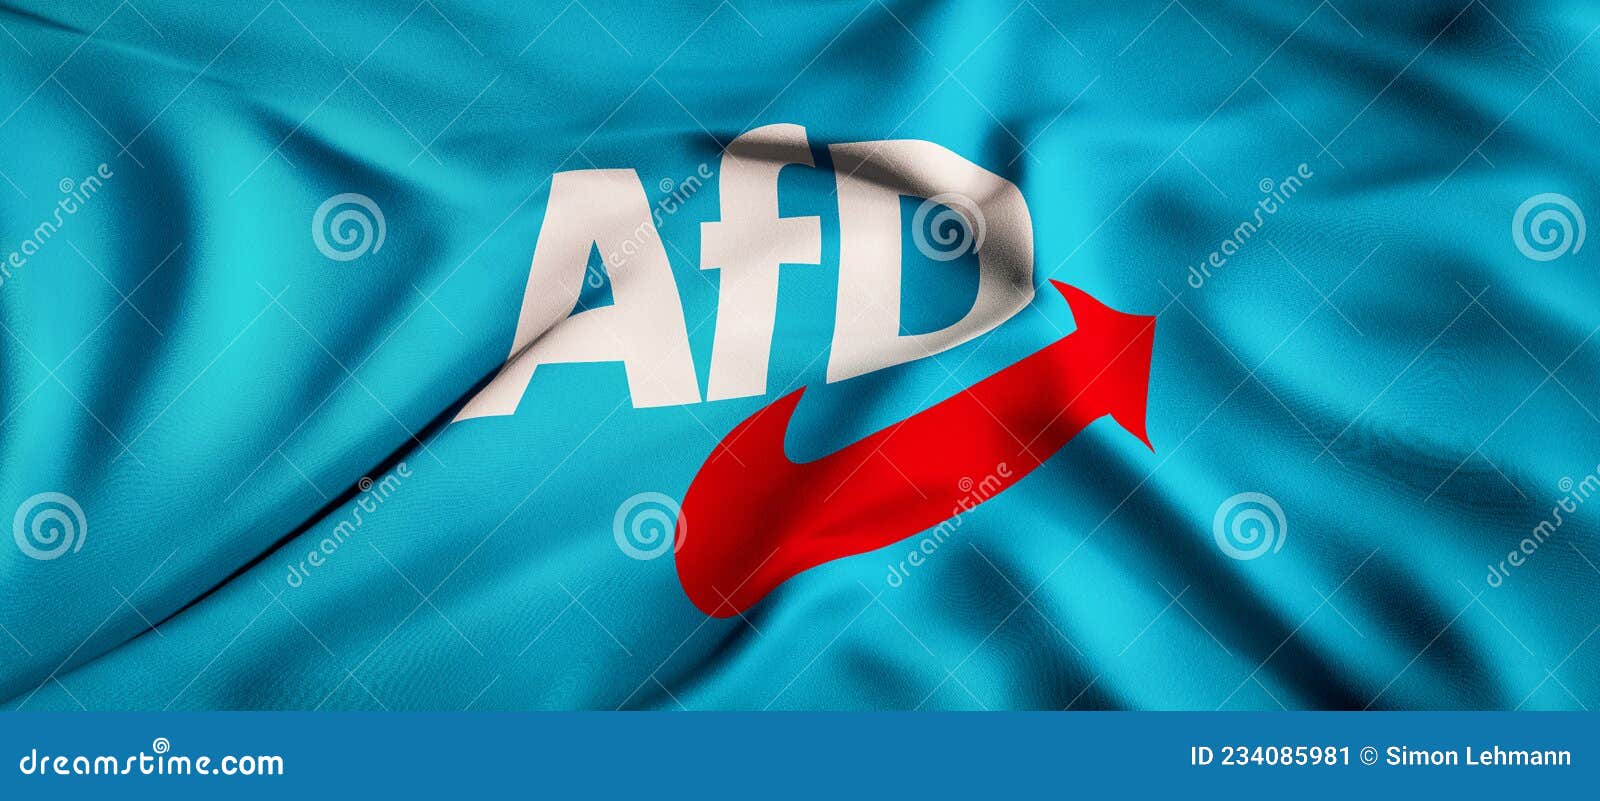 Flag of Parties Concept - AFD Editorial Photo - Illustration of